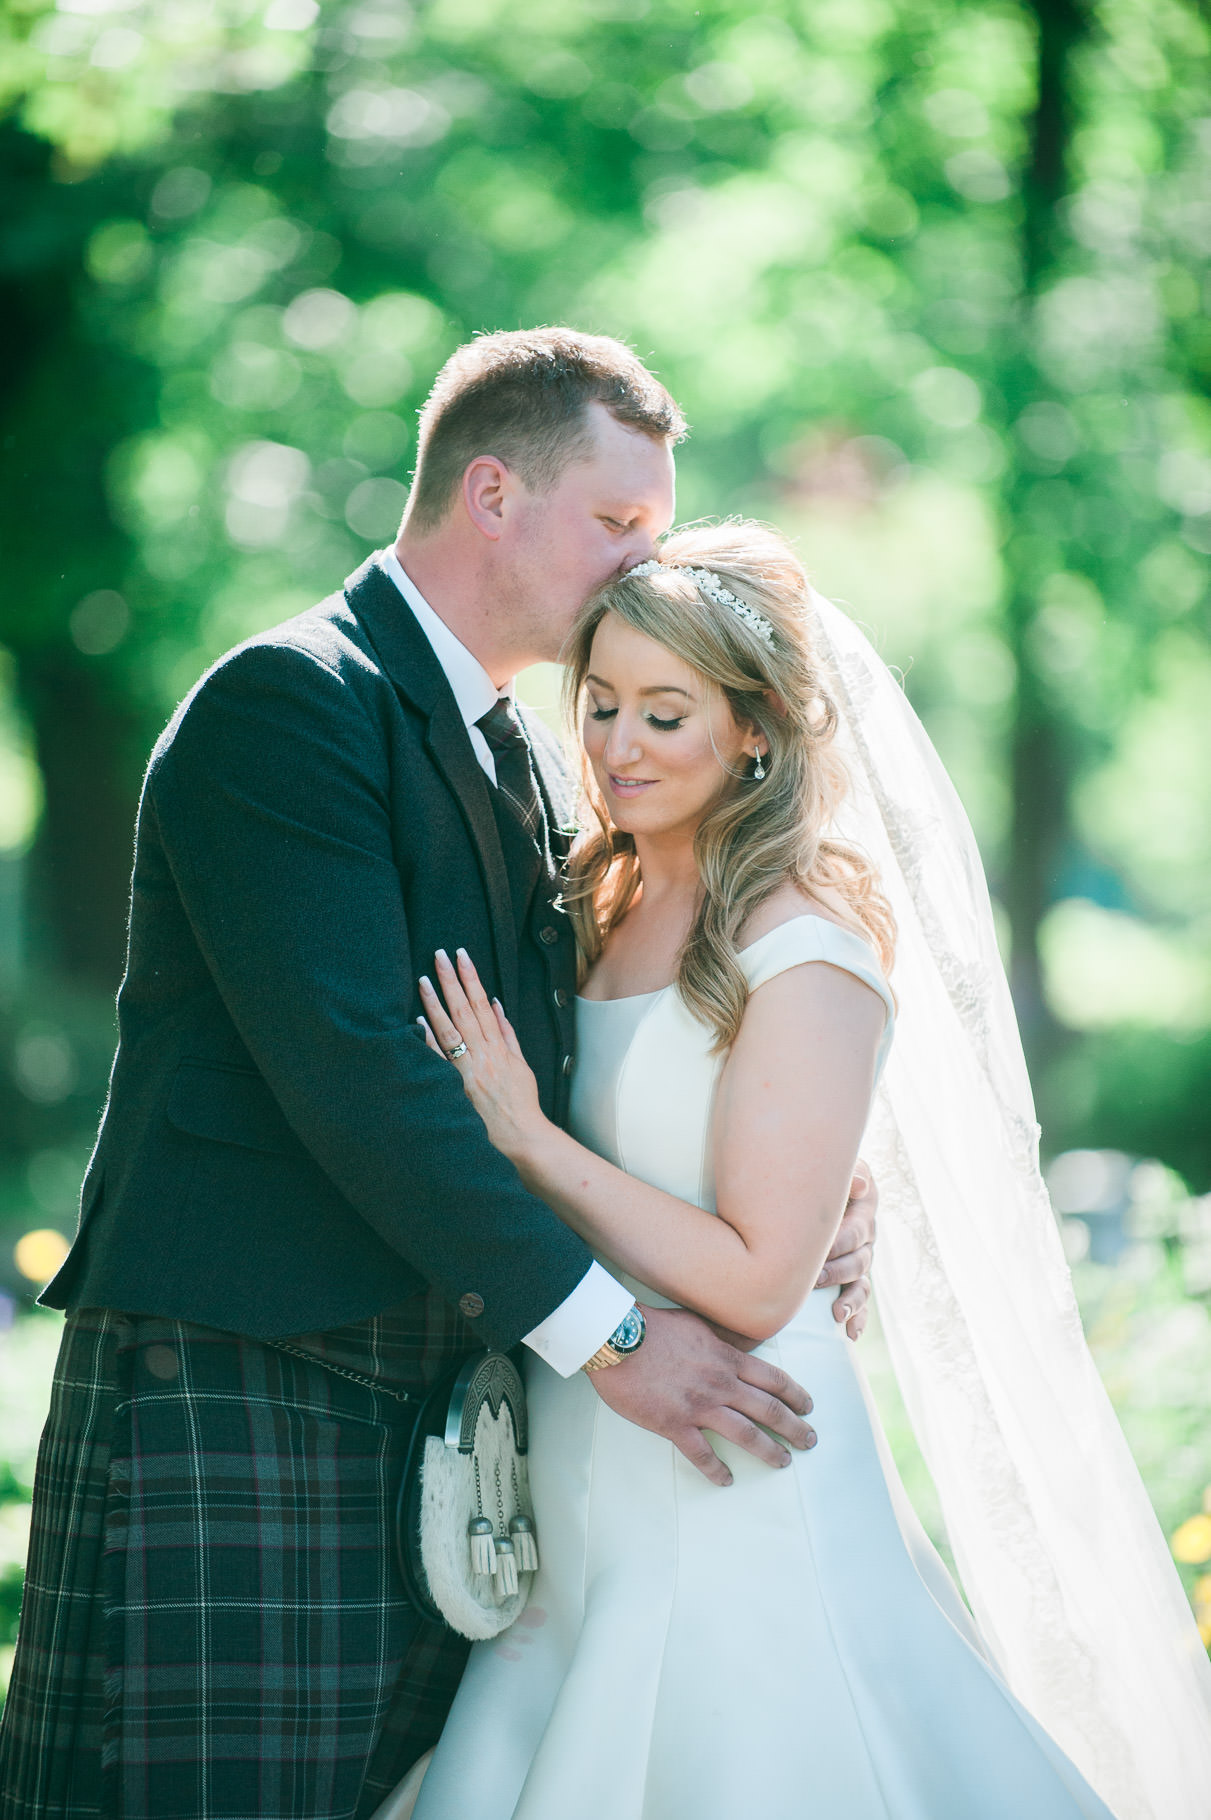 Summer Wedding in Scotland at House For An Art Lover-bride and groom embrace-backlit bride and groom